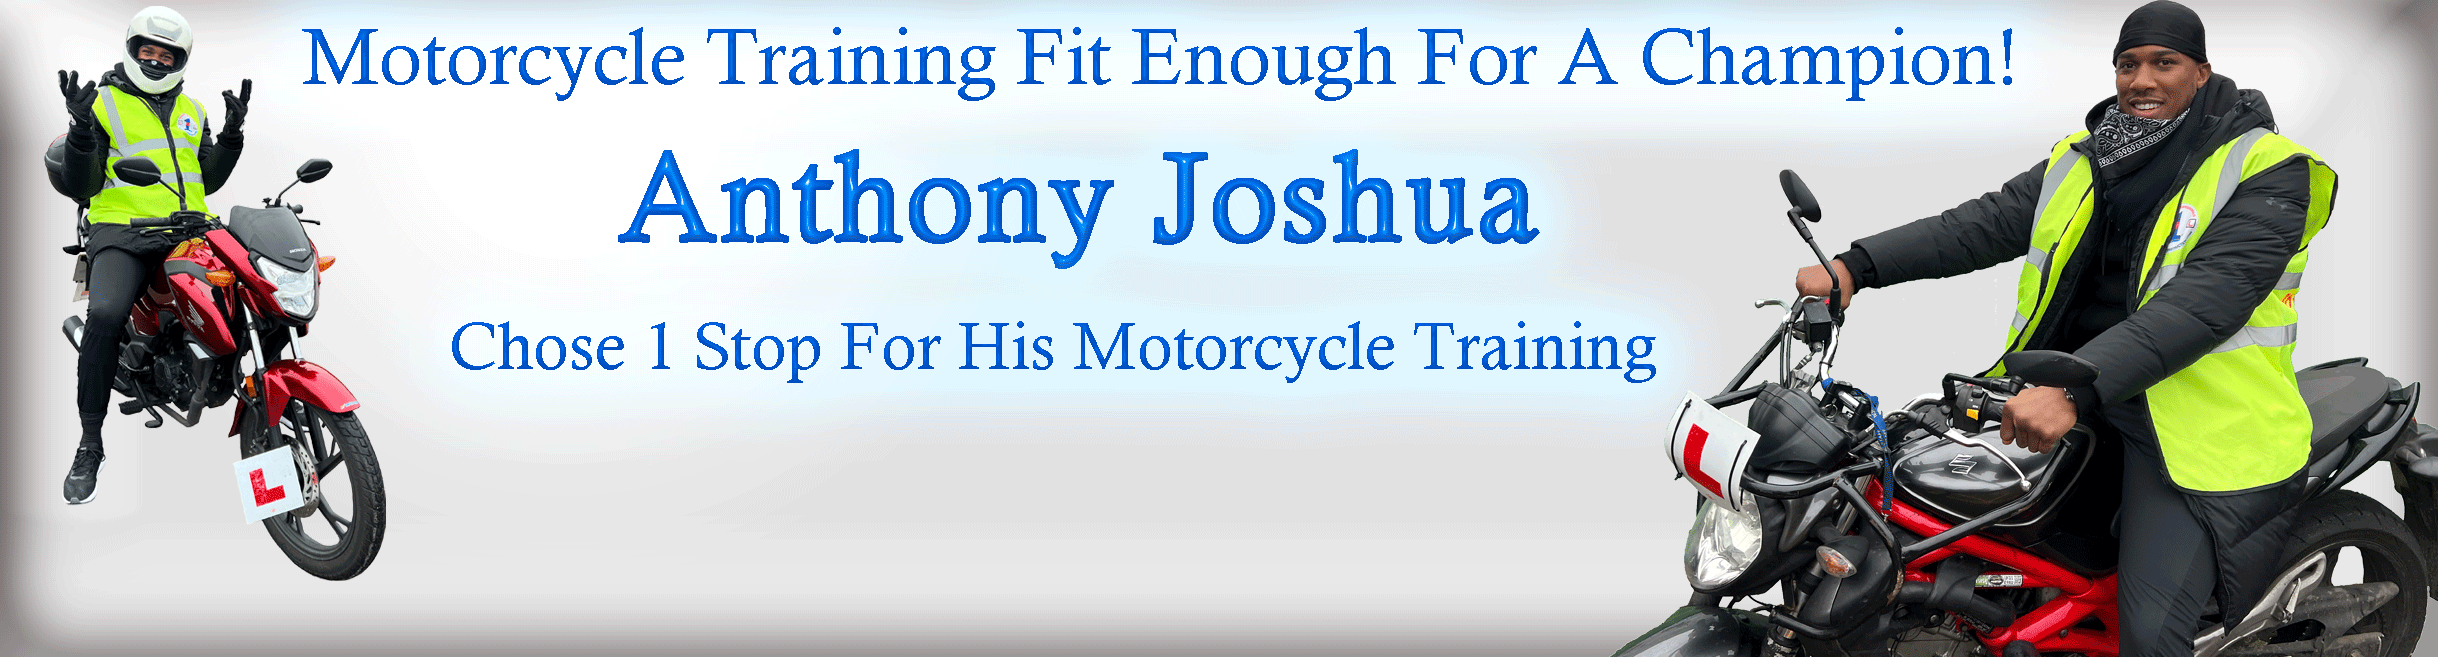 The Champions Choice For Motorcycle Training